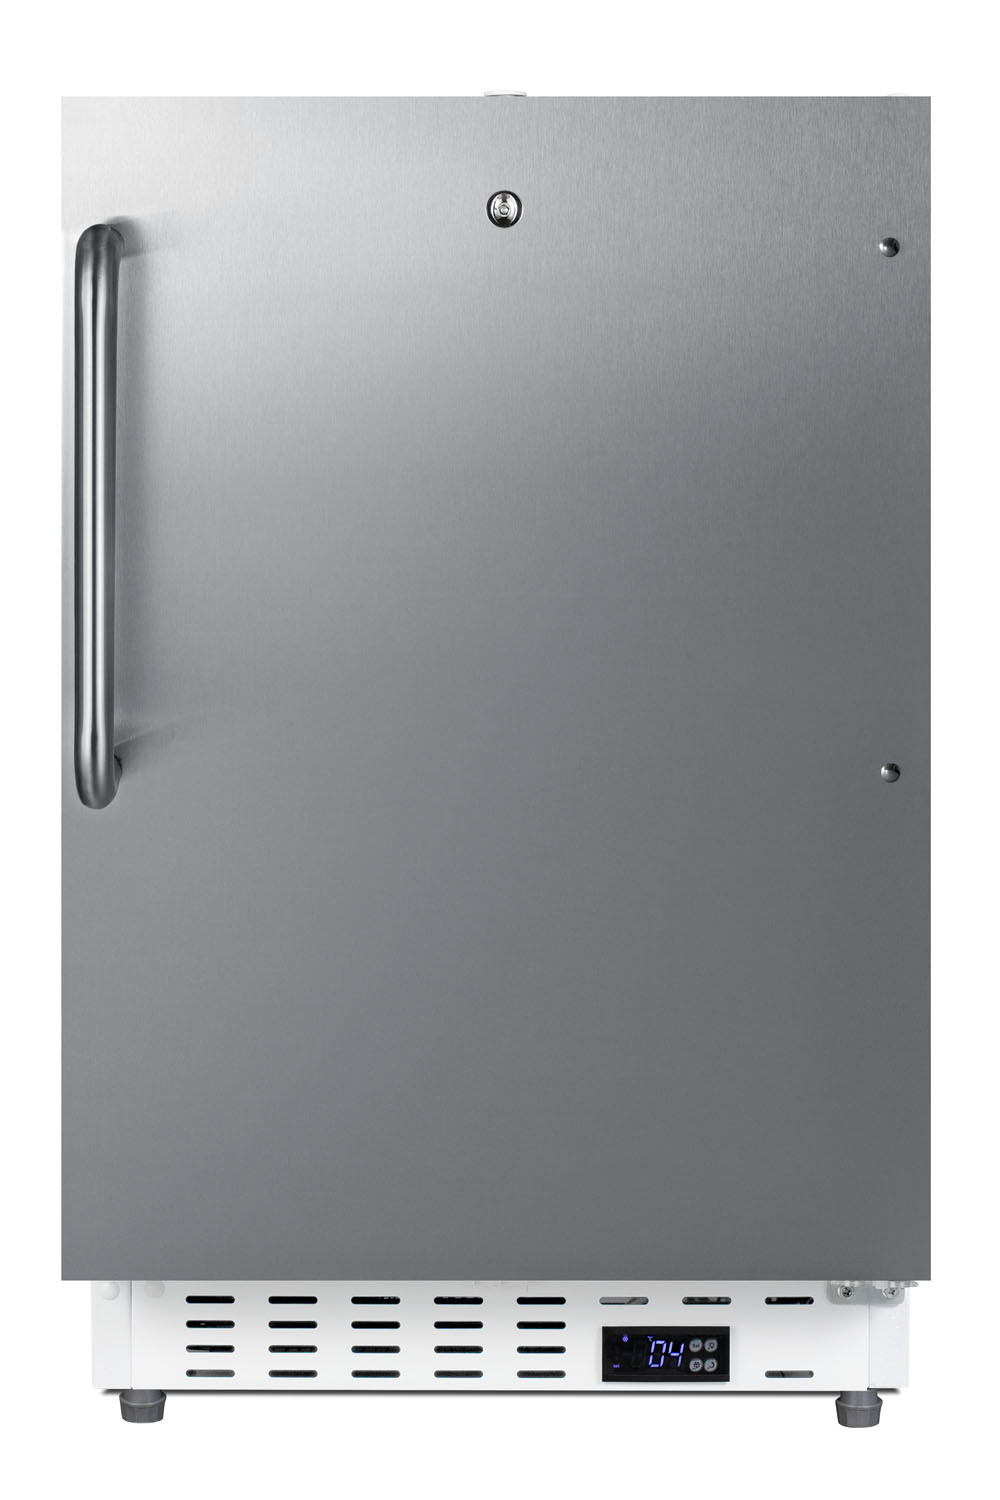 Summit 21" Wide Built-In Commercial All-Refrigerator, ADA Compliant